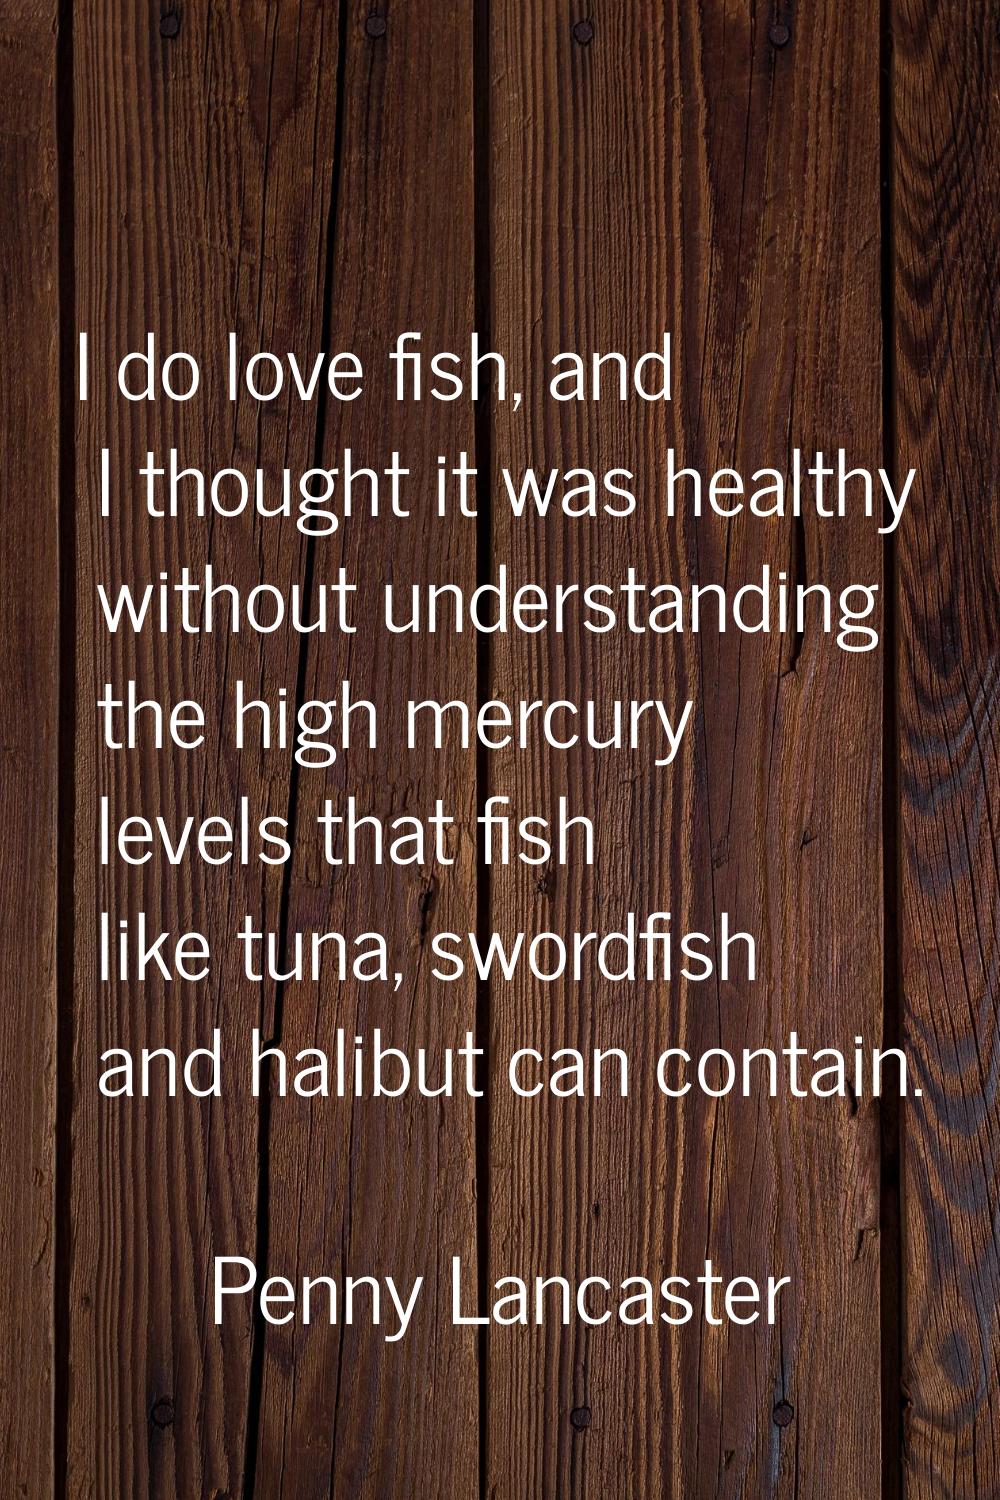 I do love fish, and I thought it was healthy without understanding the high mercury levels that fis